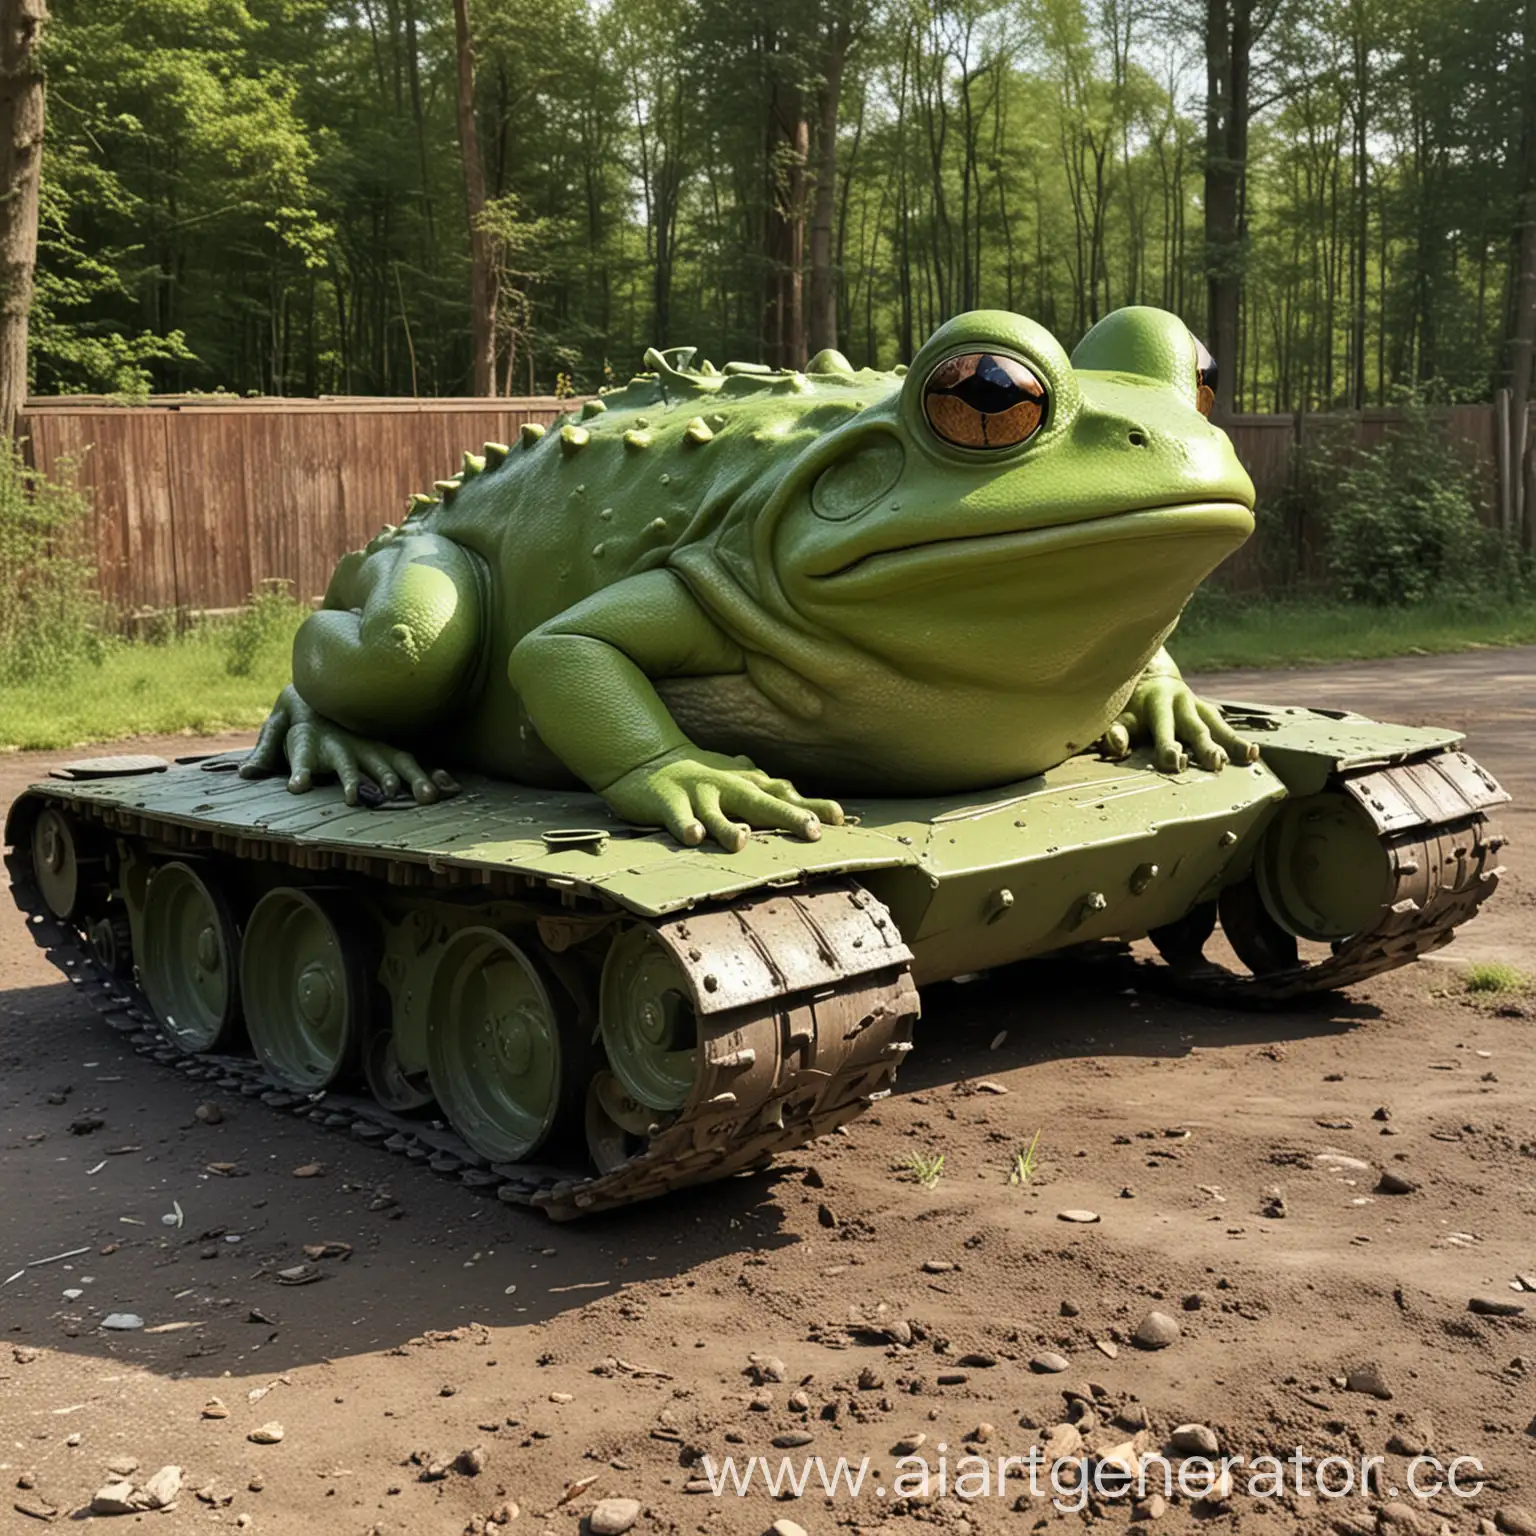 FrogShaped-Tank-Camouflaged-in-Nature